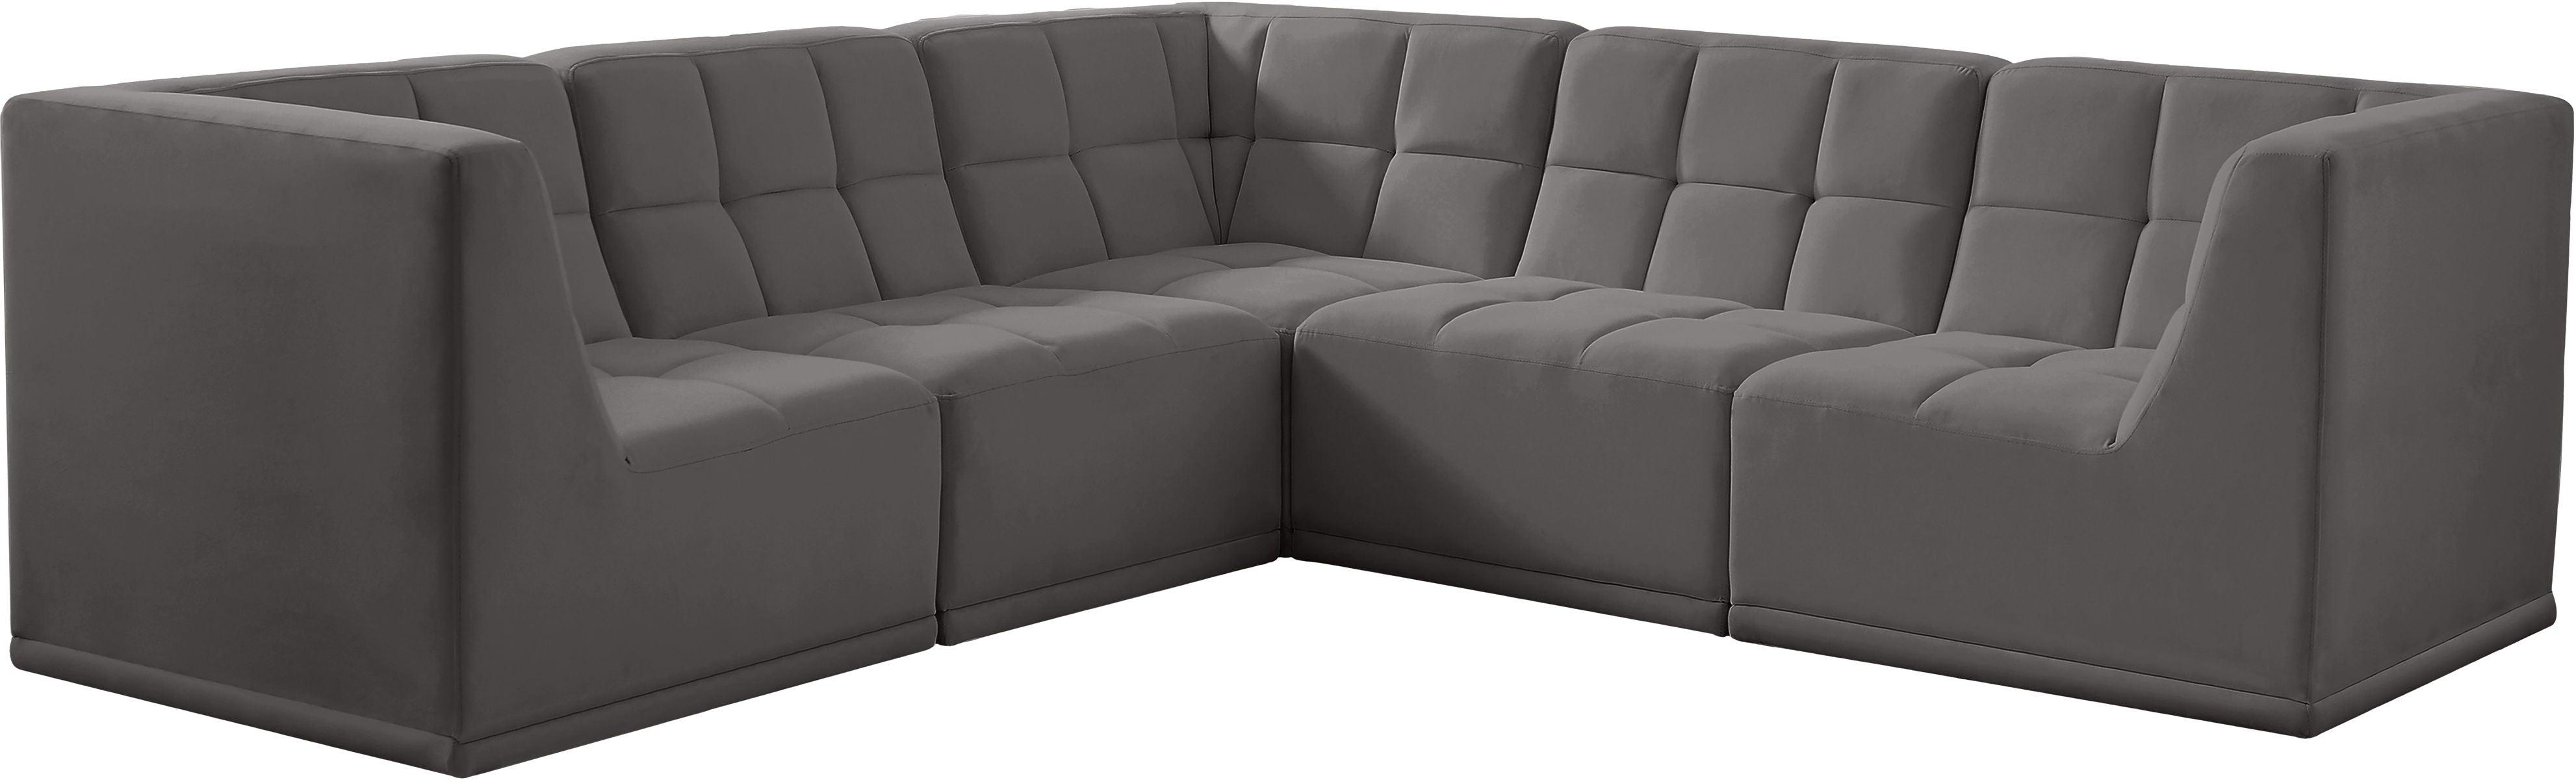 Meridian Furniture - Relax - Modular Sectional 5 Piece - Gray - Modern & Contemporary - 5th Avenue Furniture